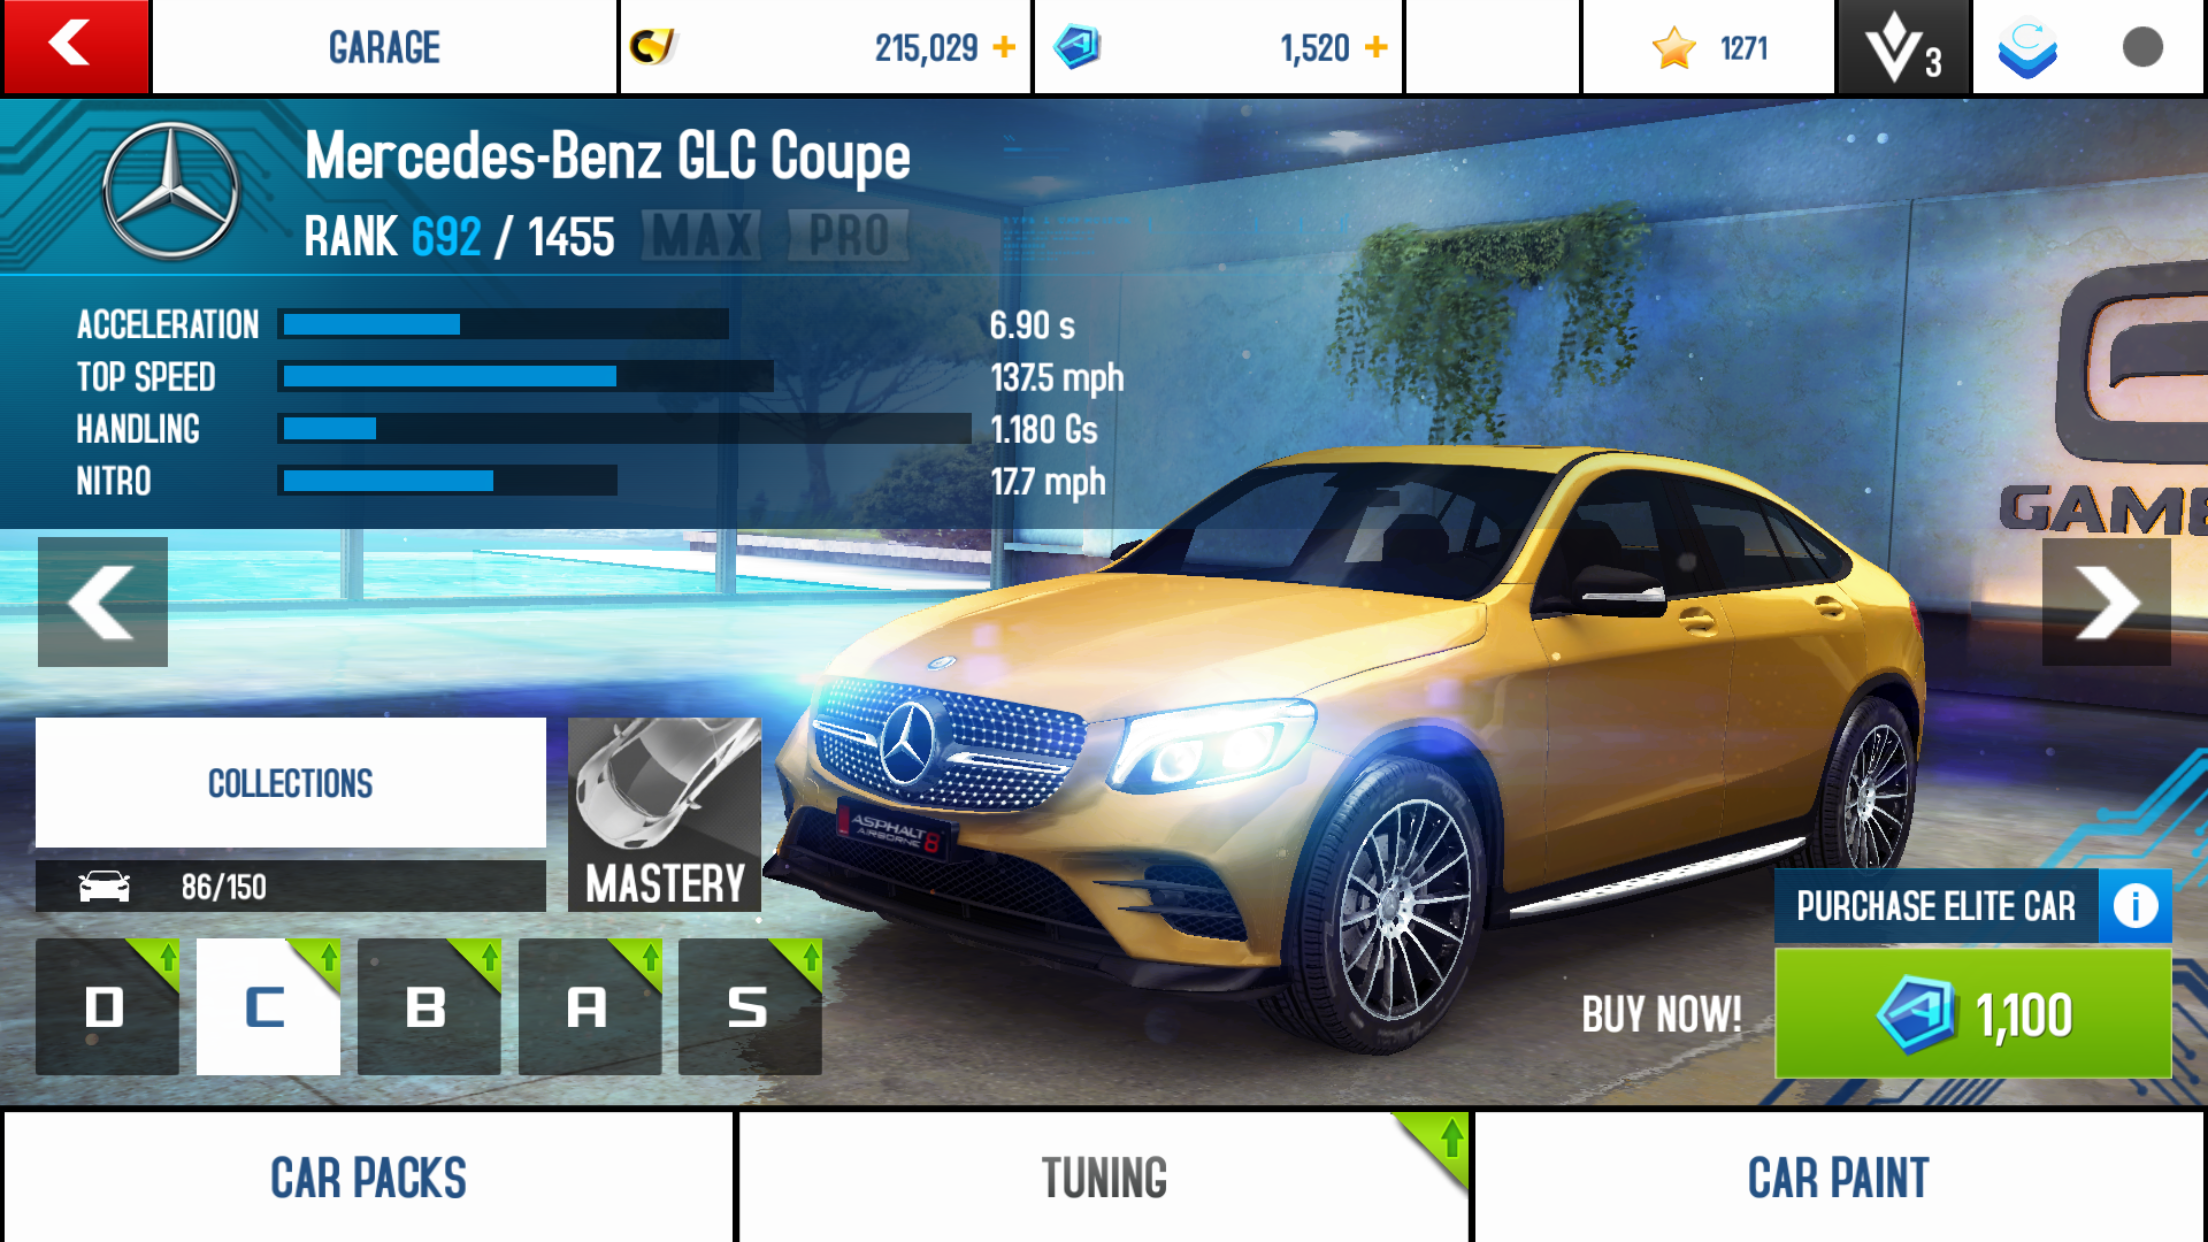 Mercedes-Benz_GLC_Coupe_price.png